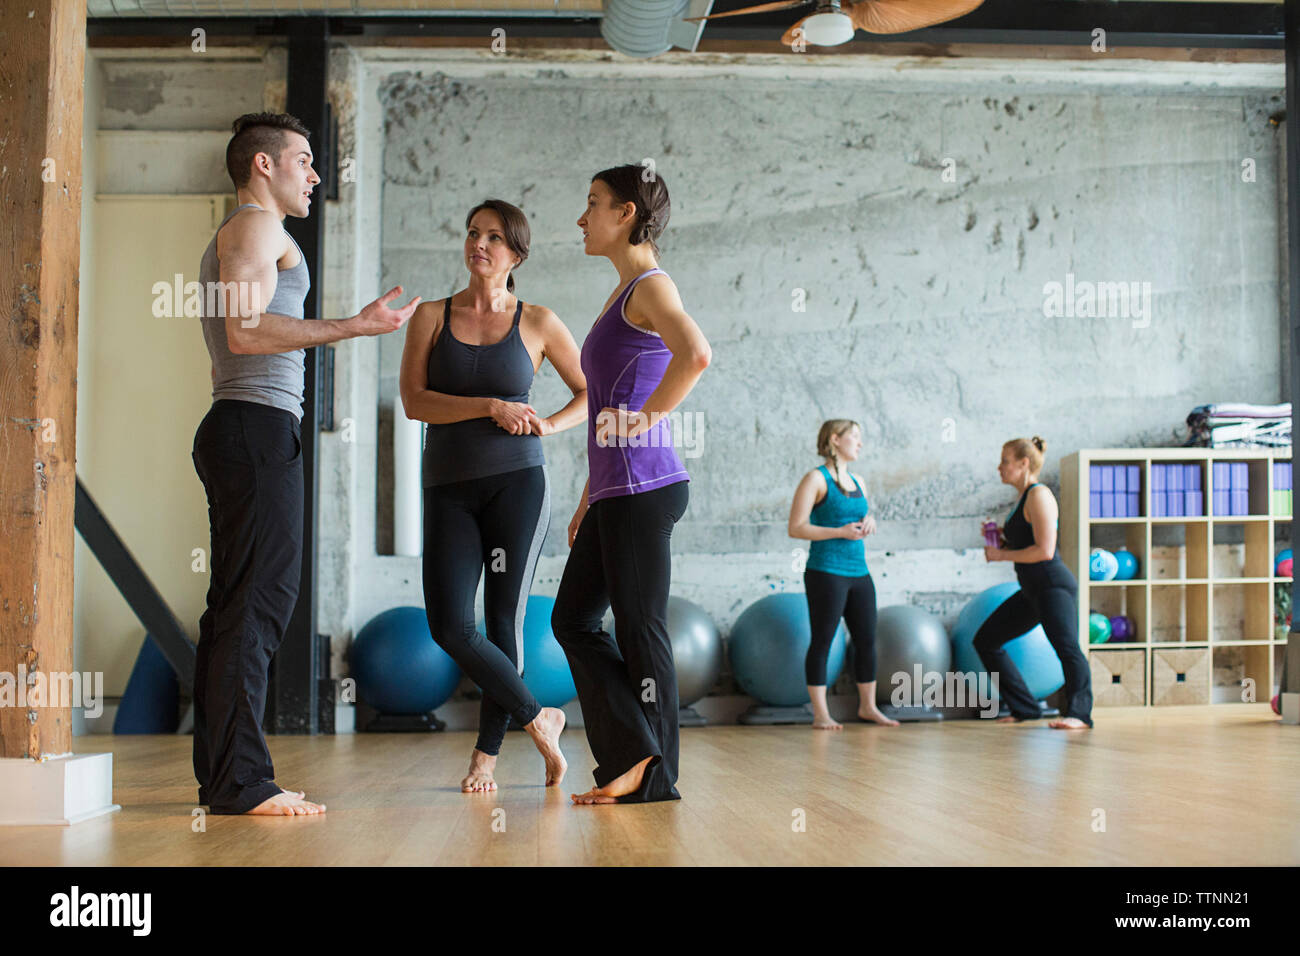 Male instructor guiding women in gym Stock Photo